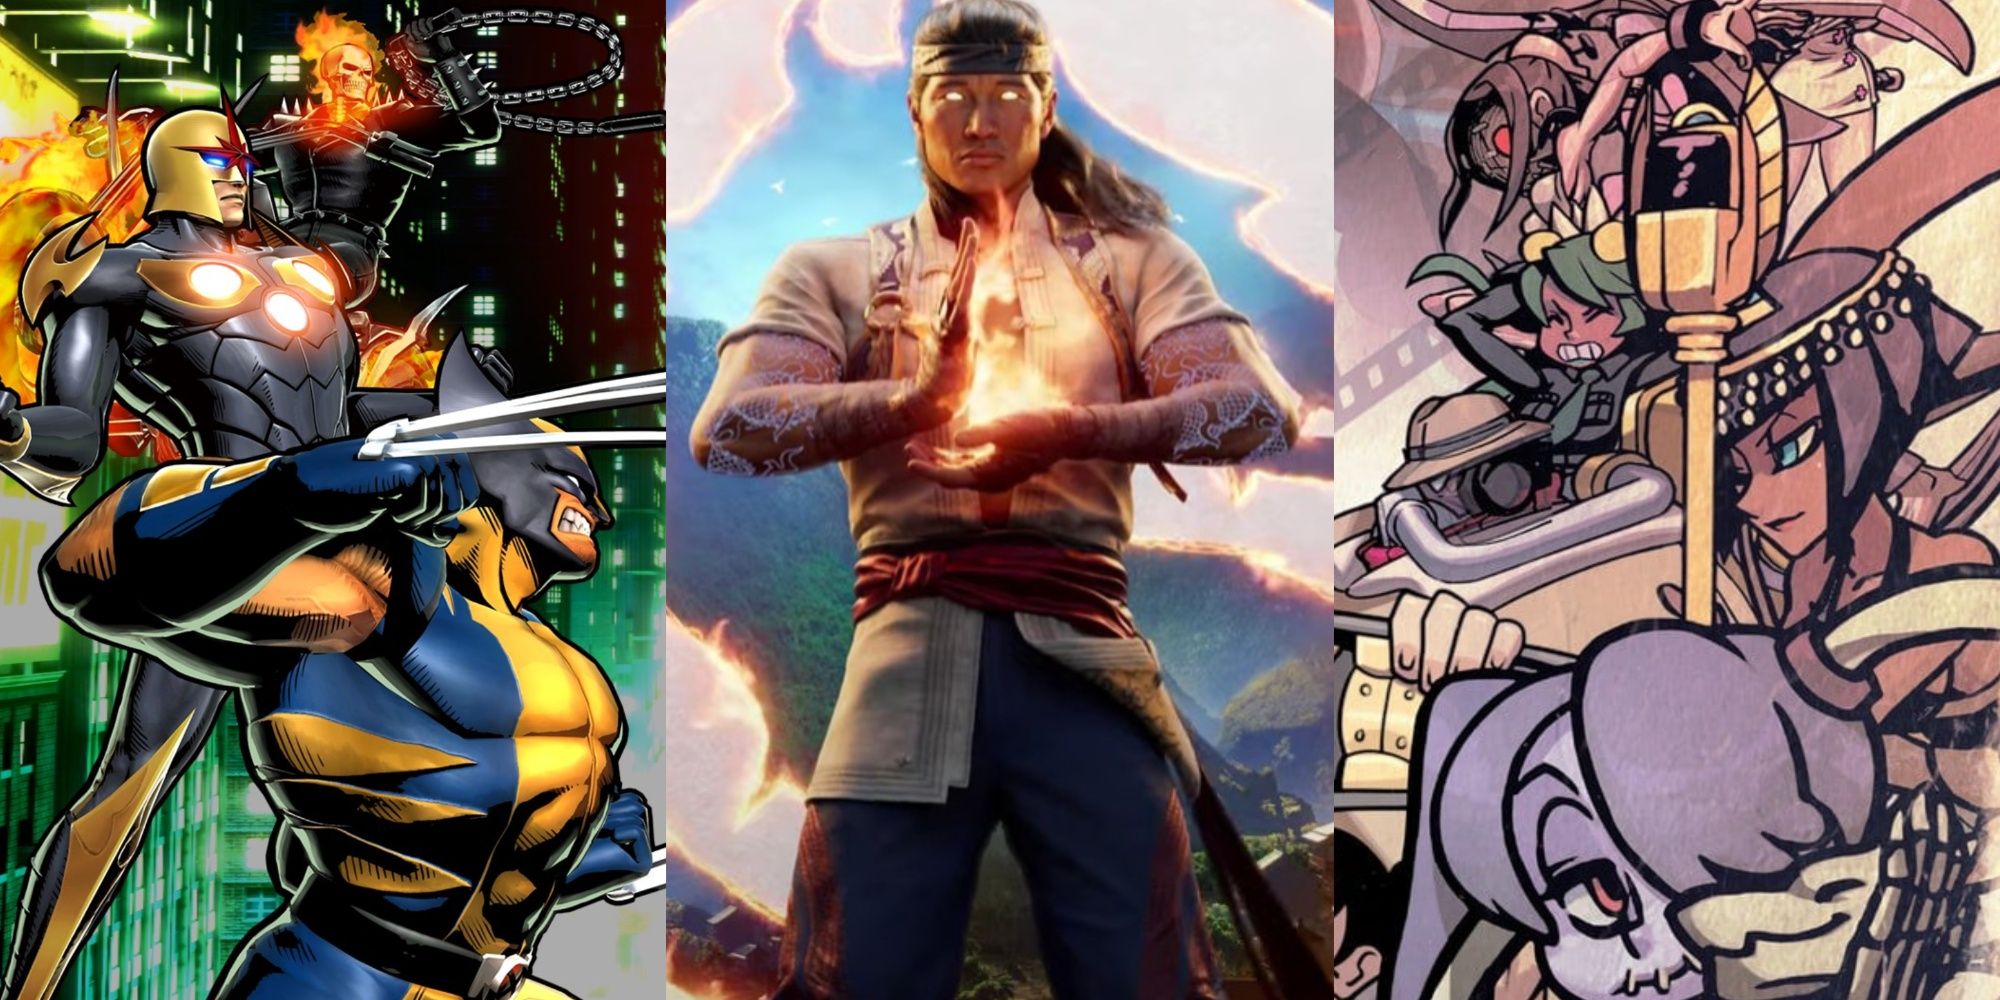 A collage of images showcasing characters from Ultimate Marvel Vs. Capcom 3, Mortal Kombat 1, and Skullgirls 2nd Encore